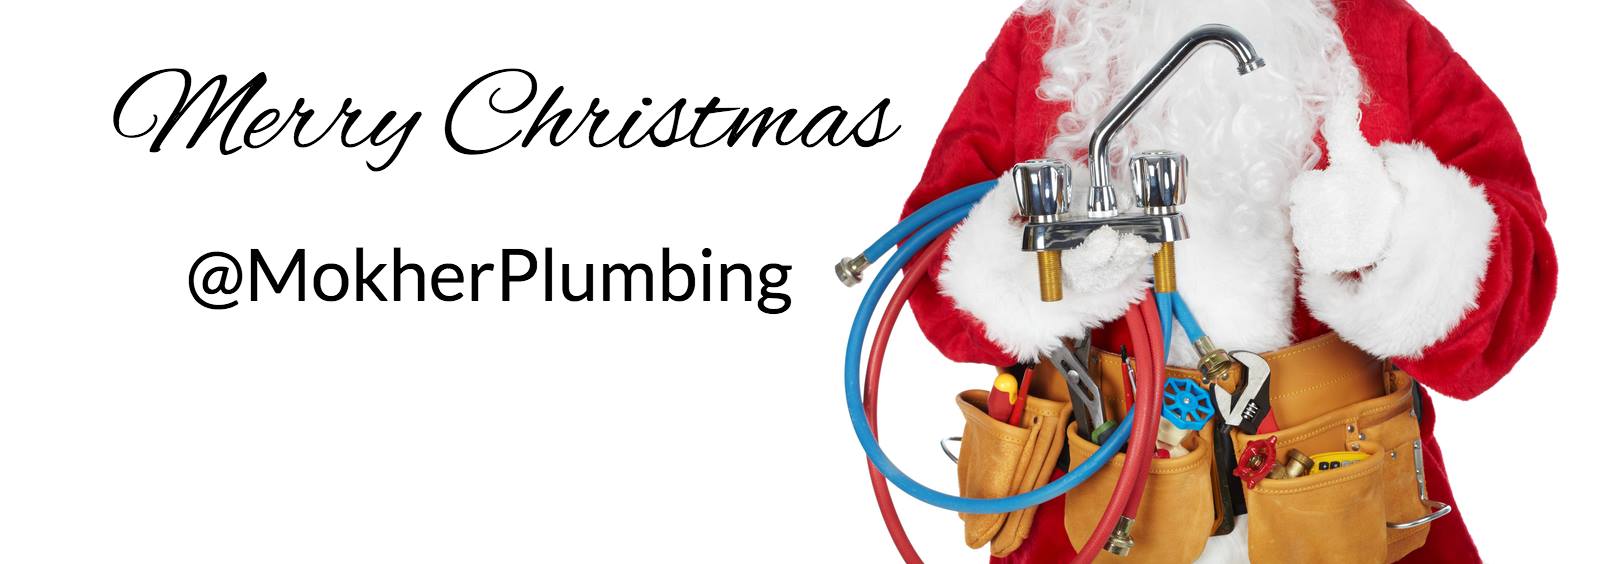 Tips to Help You Avoid Holiday Plumbing Problems